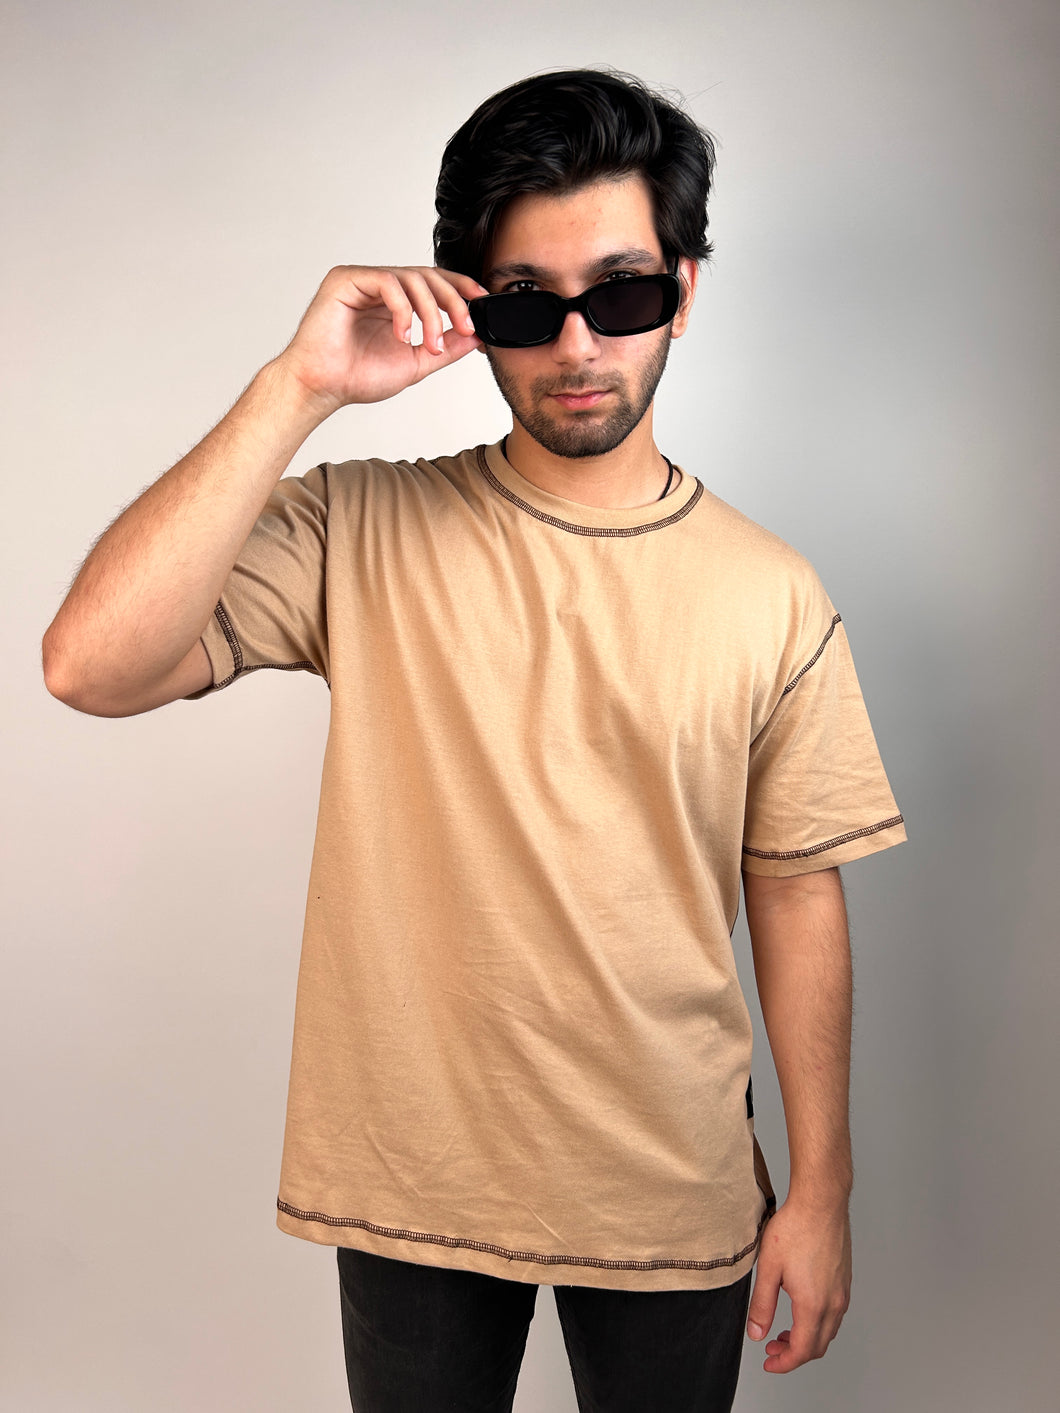 The Mochaccino Tee- Oversized fit